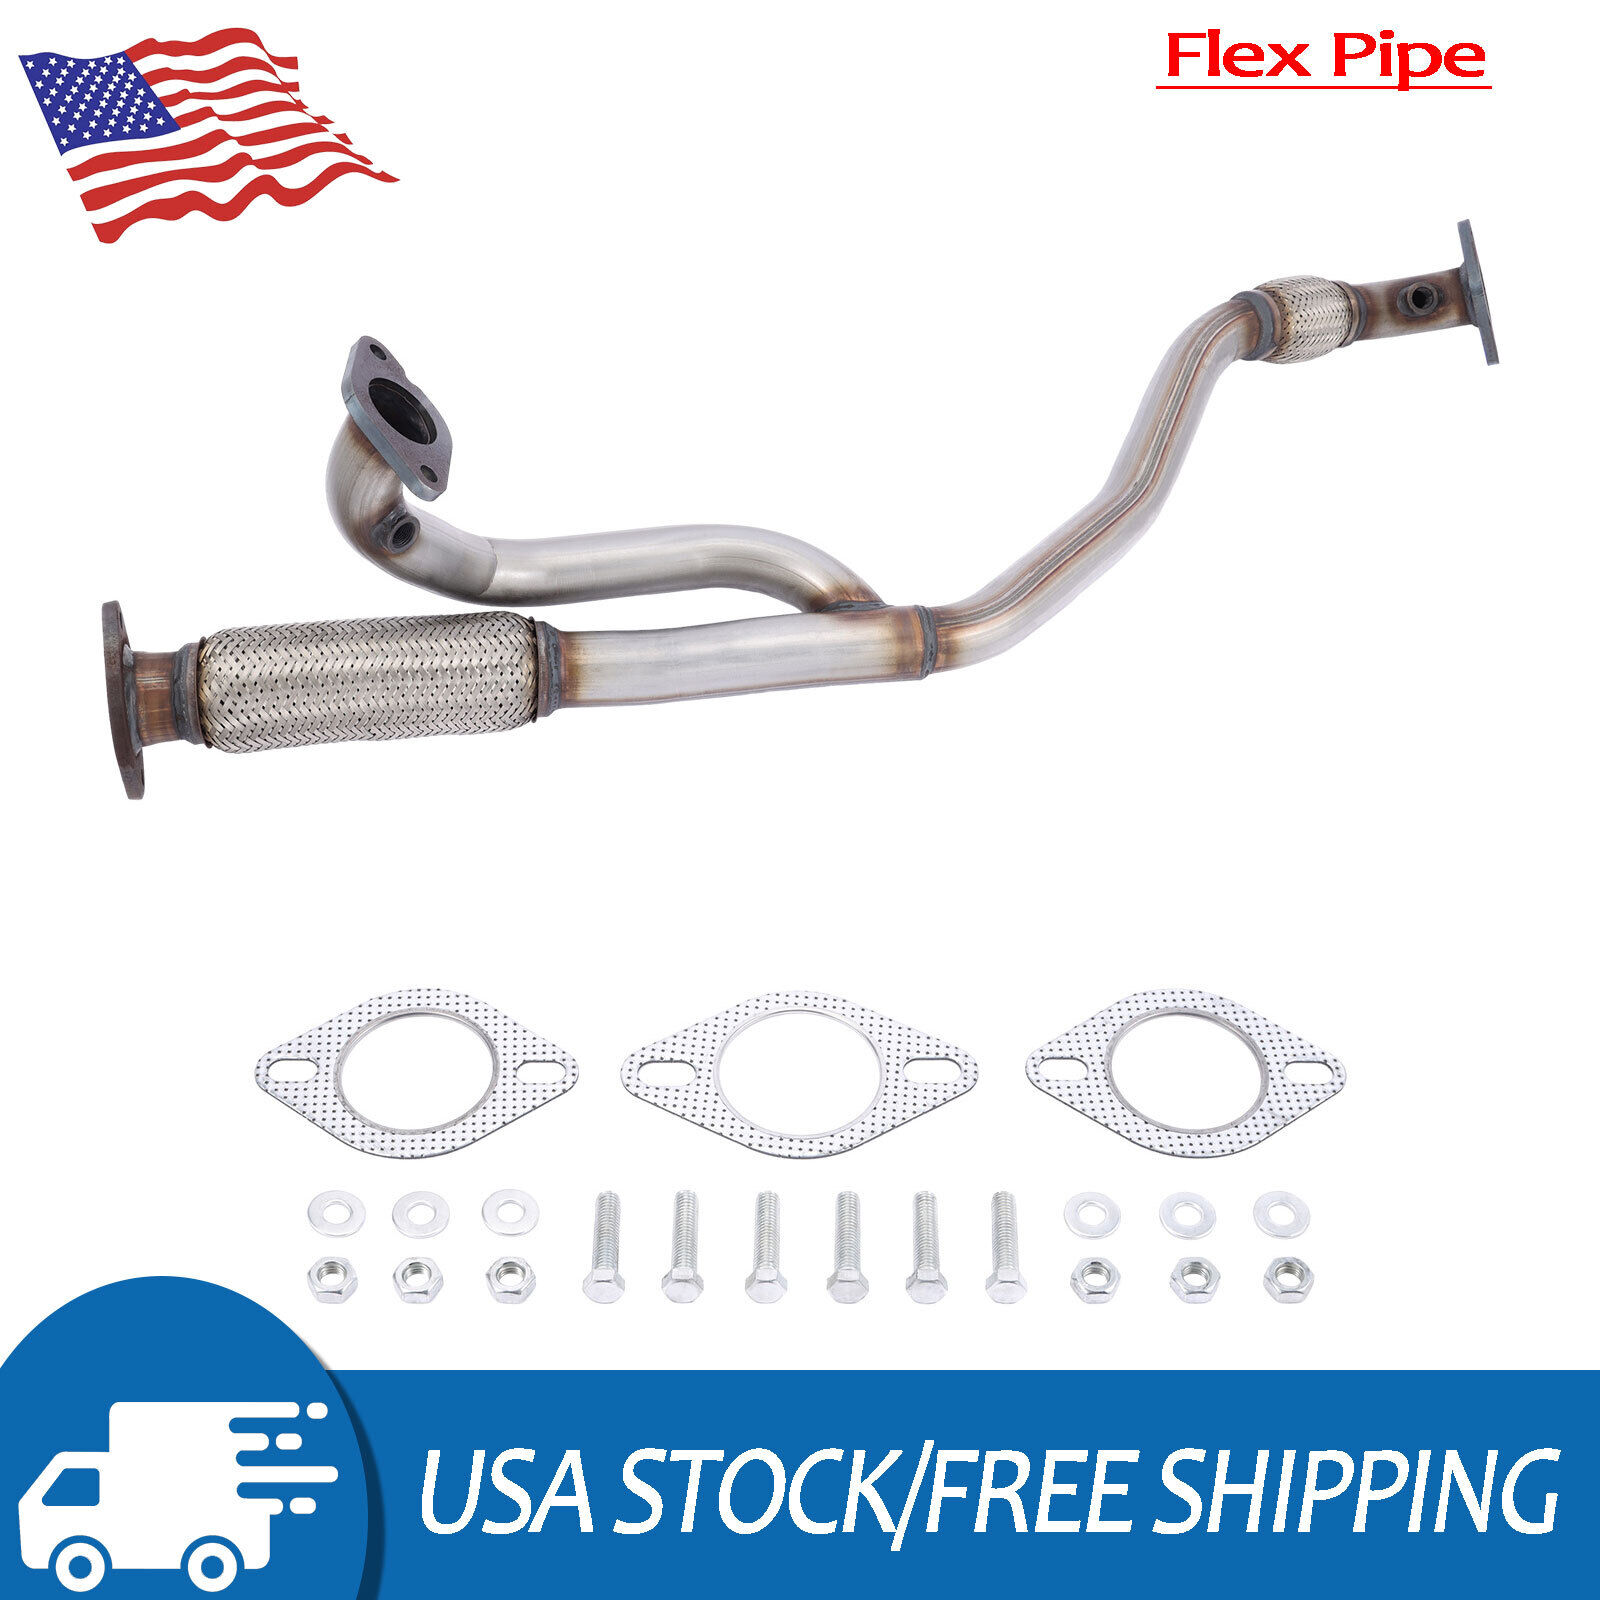 EXHAUST FRONT FLEX PIPE FOR CHEVROLET TRAVERSE/GMC ACADIA/BUICK ENCLAVE 2009-17